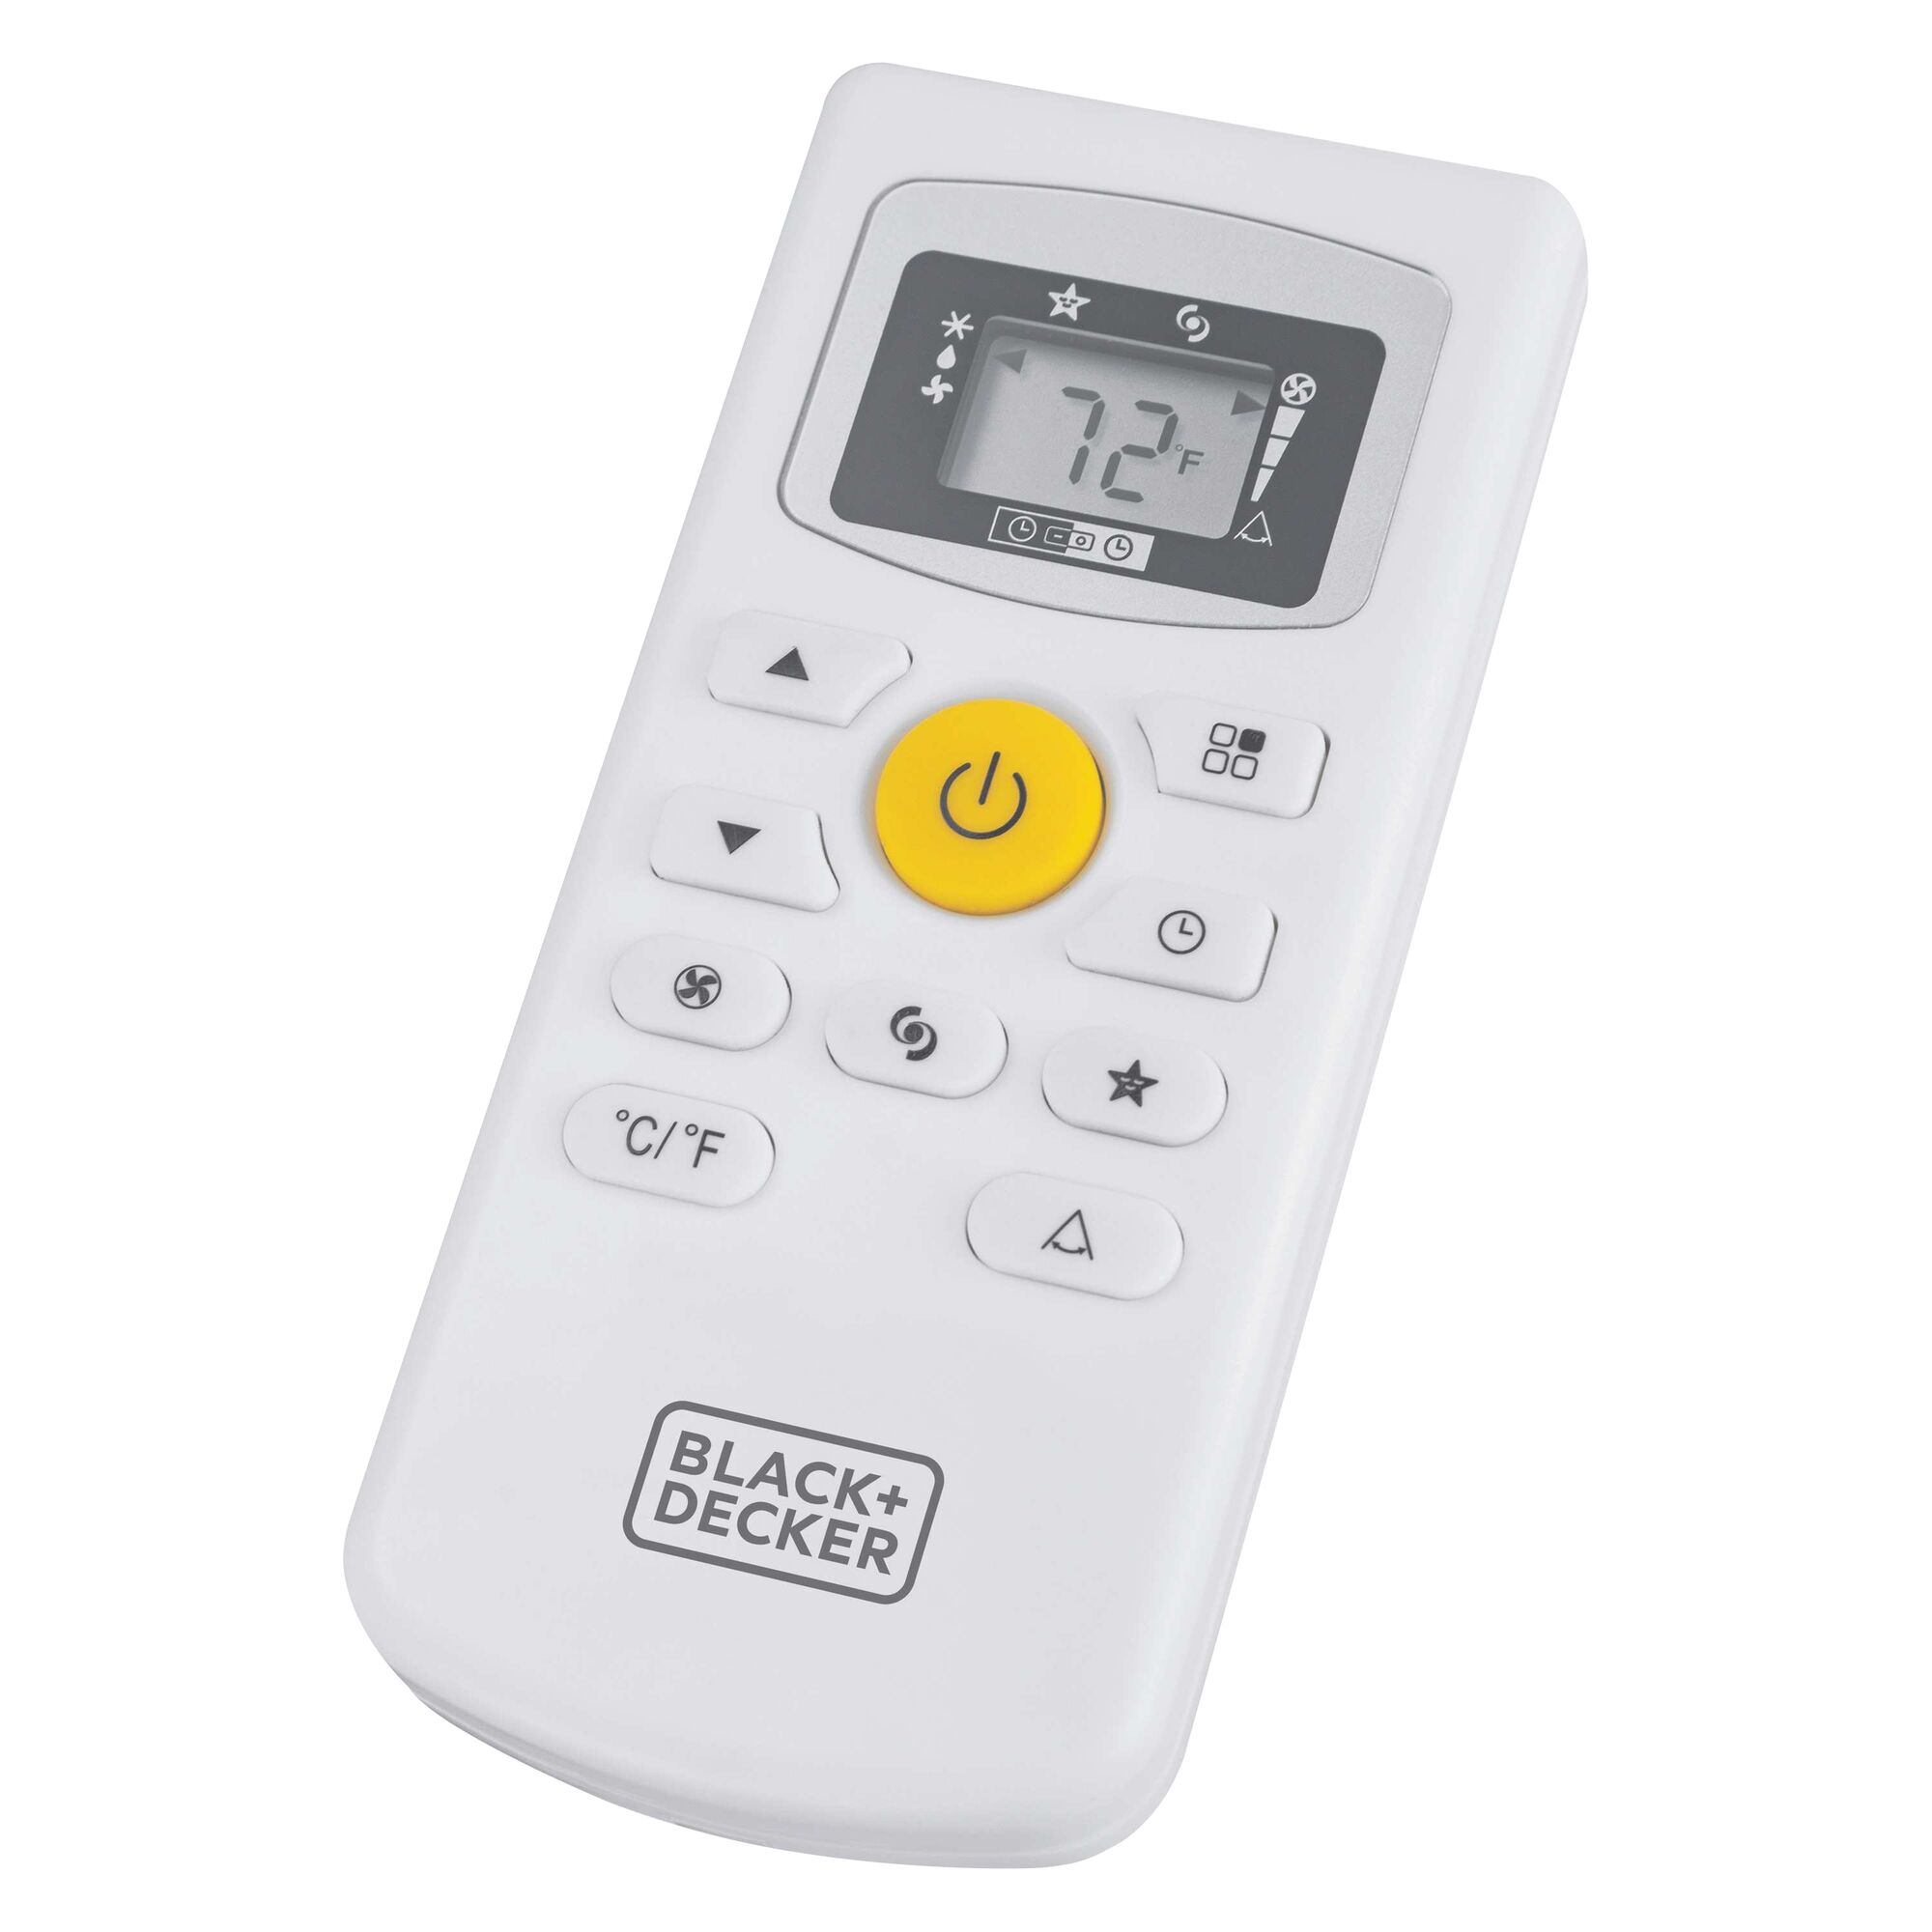 Remote controller for 7,700 British Thermal Unit portable air conditioner with heat.